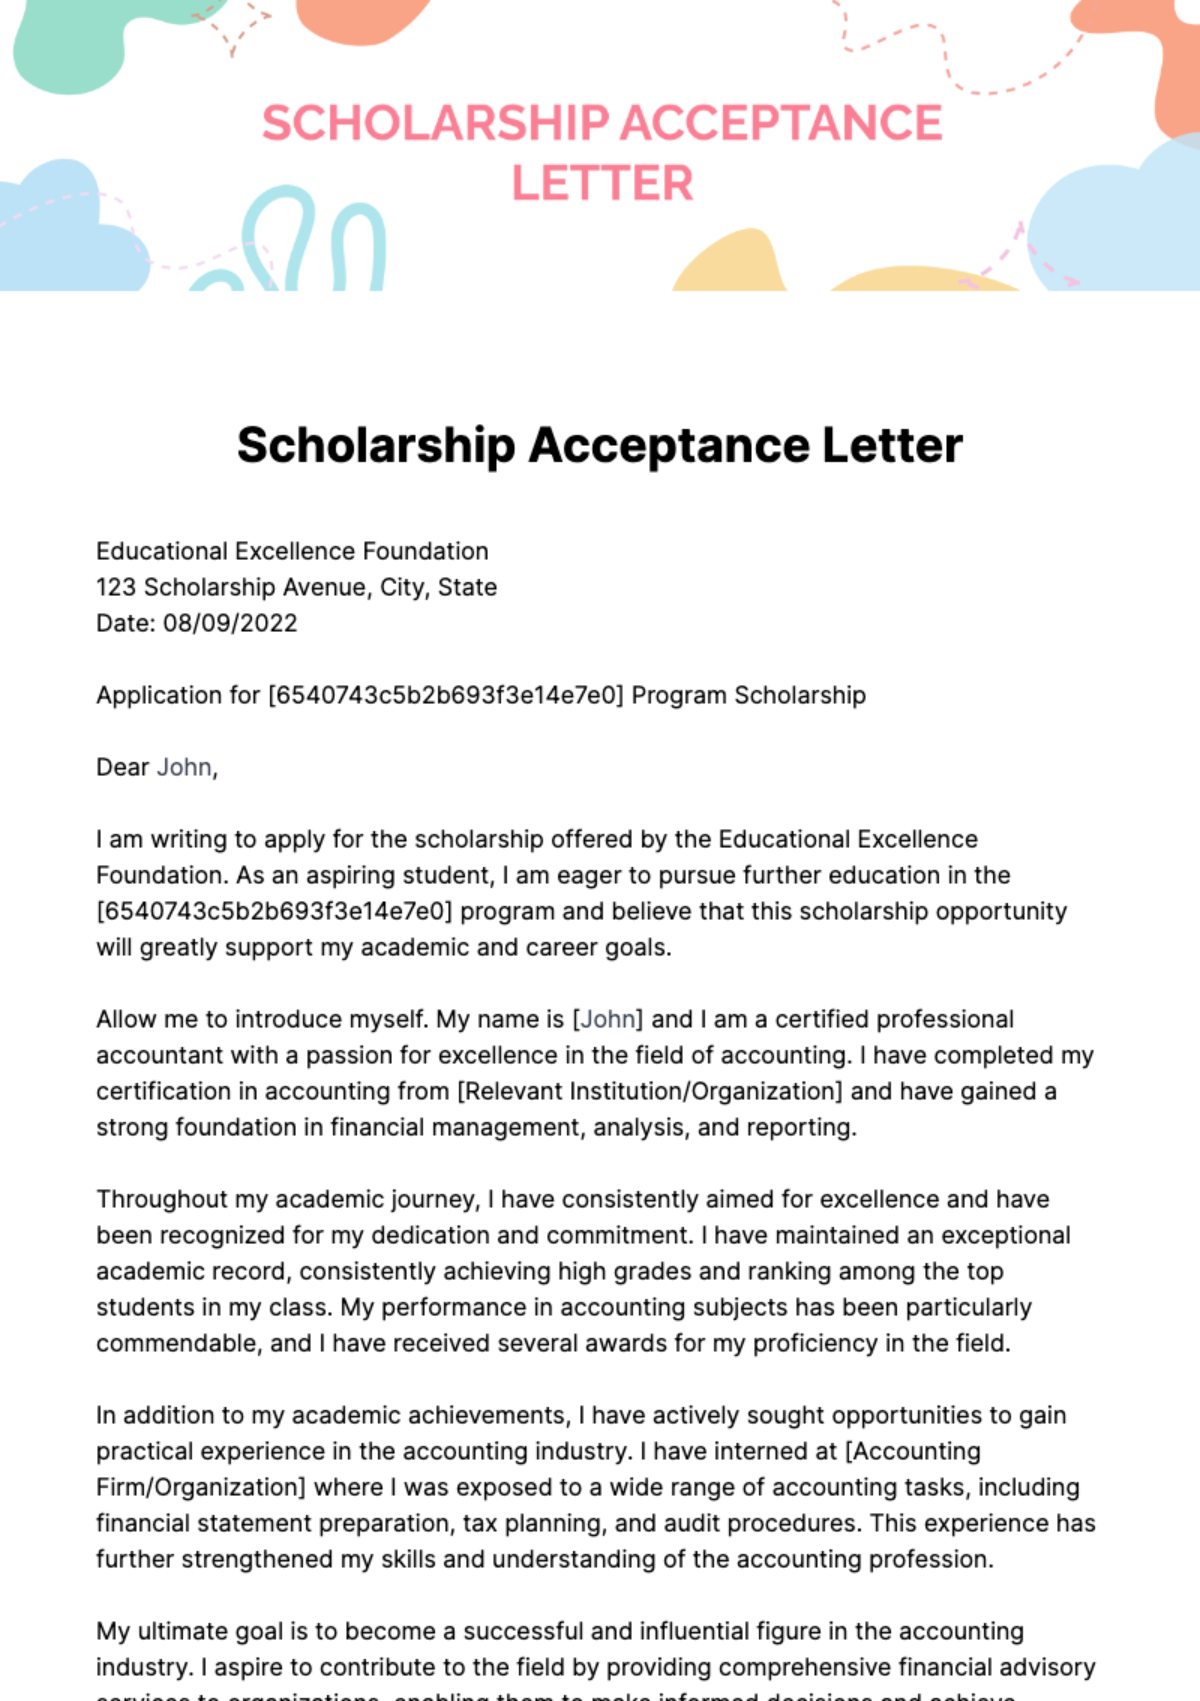 Free Scholarship Acceptance Letter Template